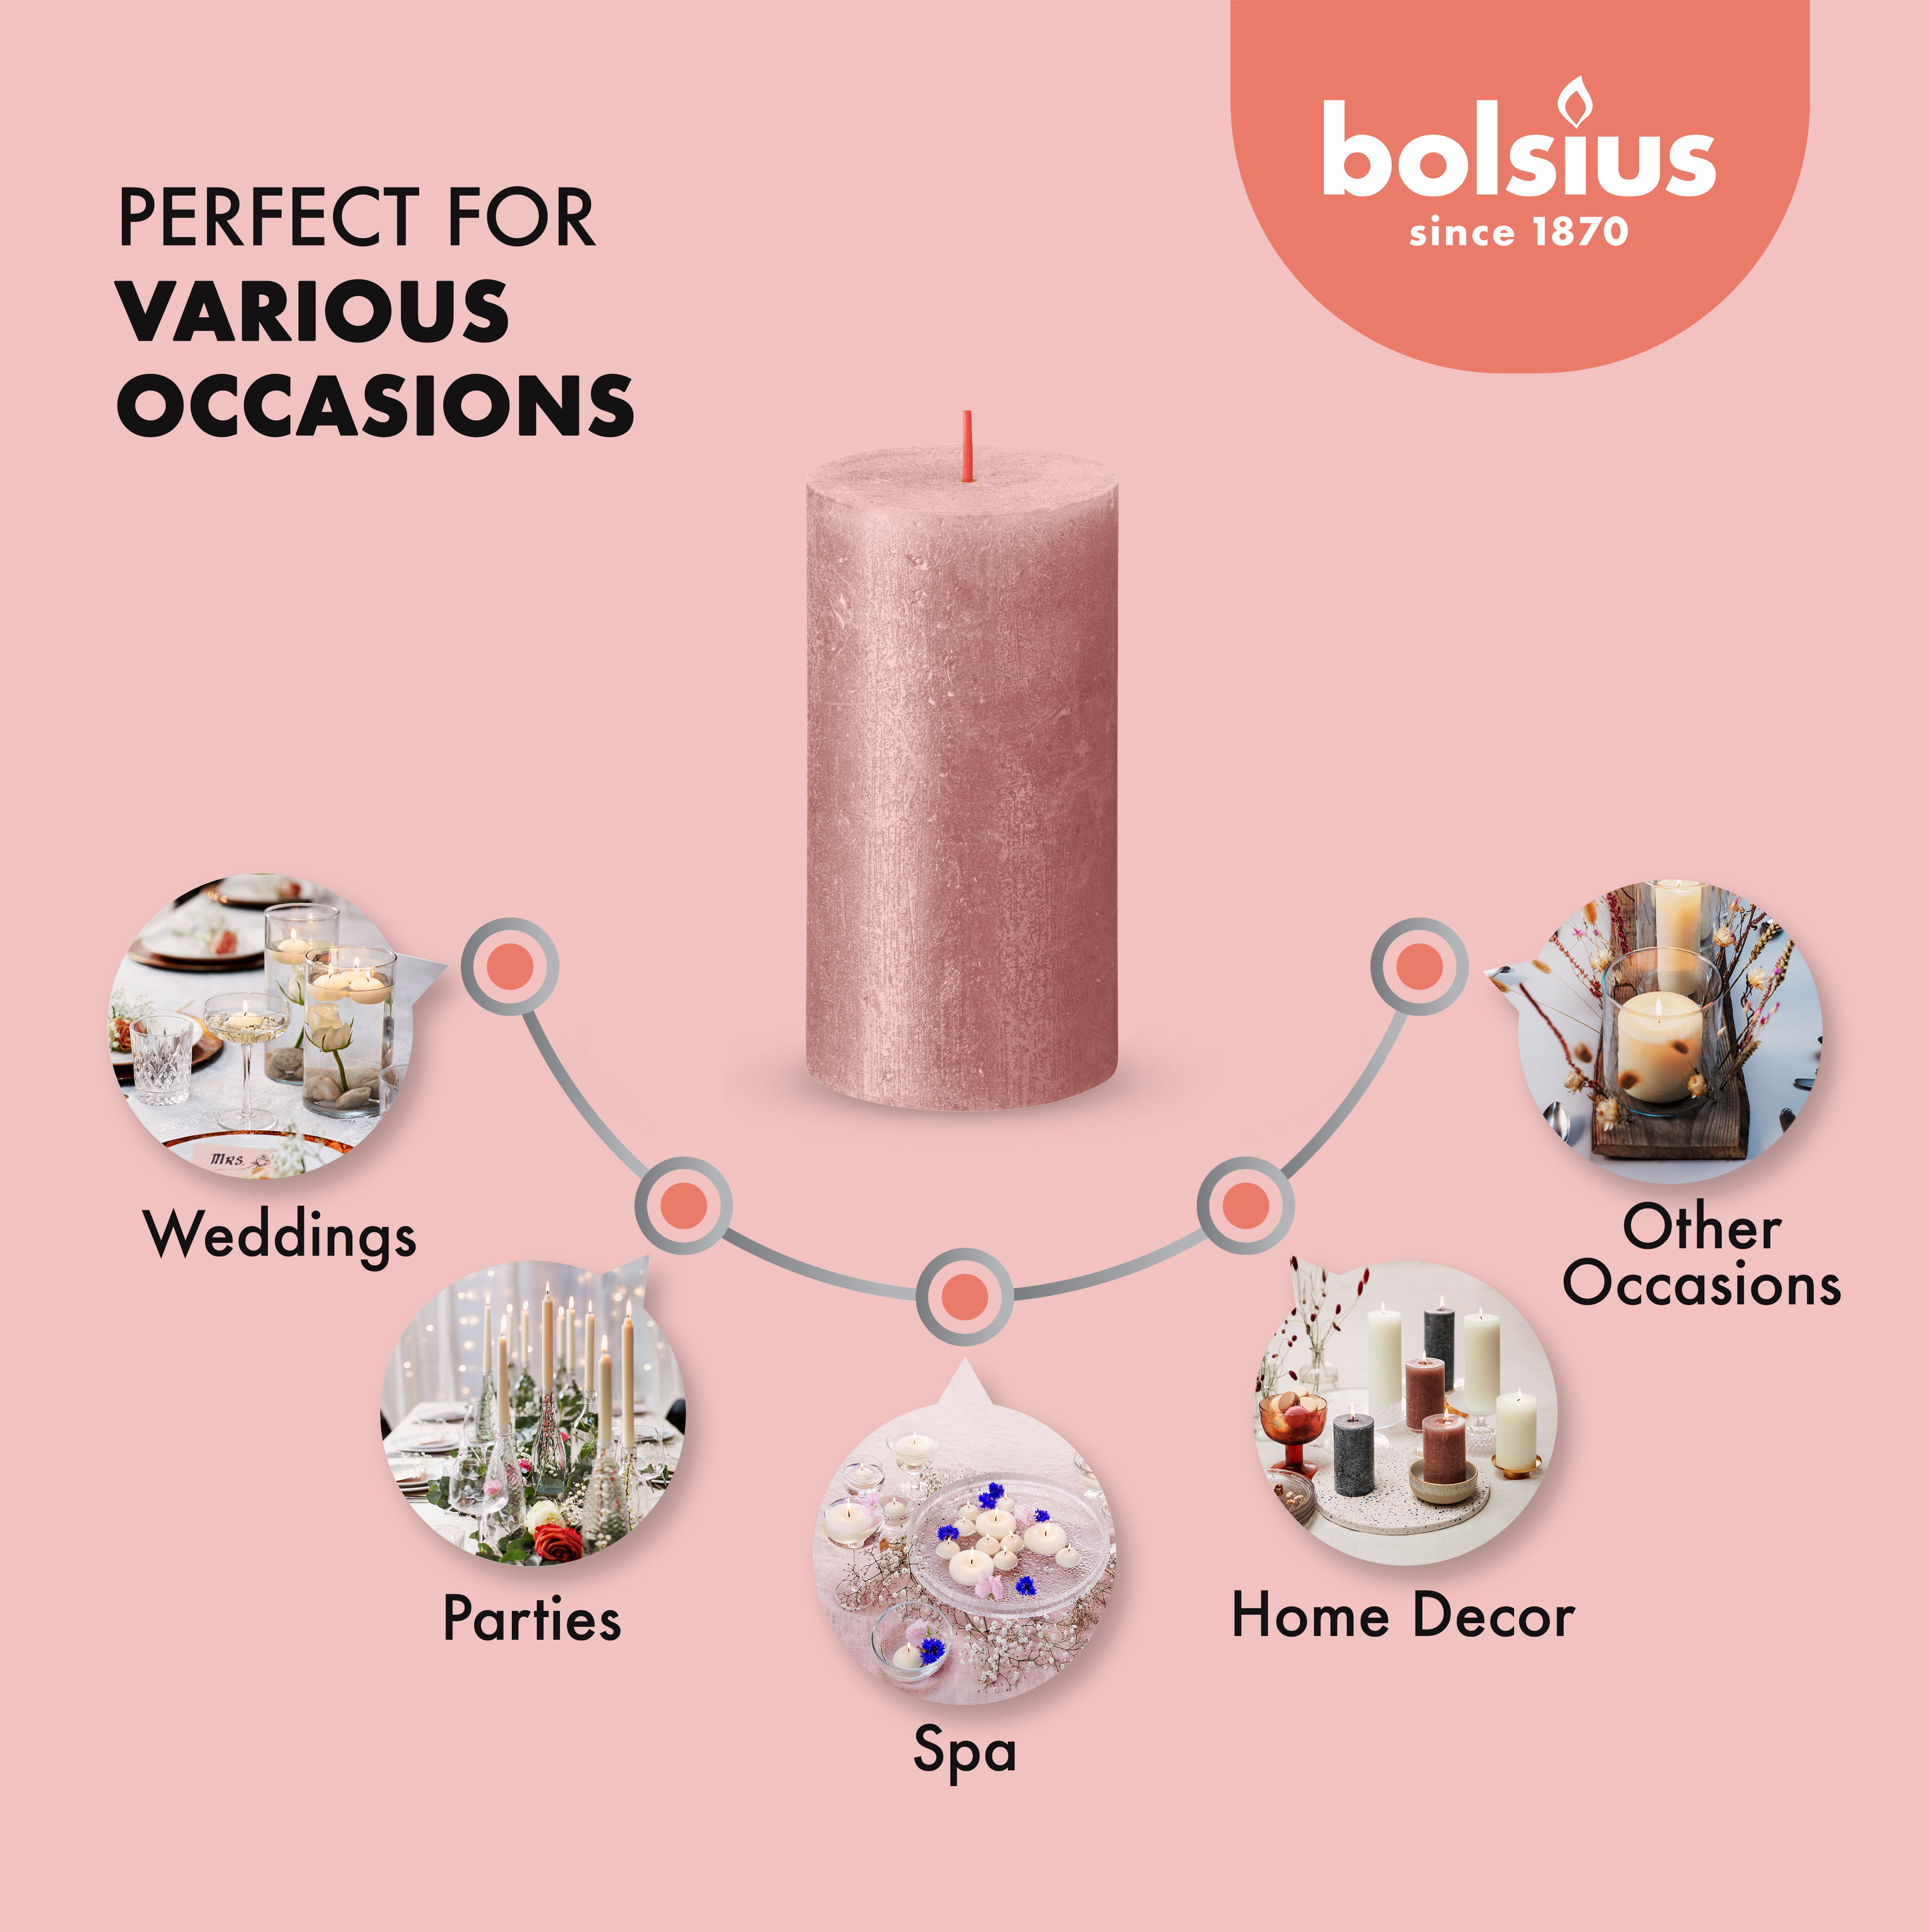 Bolsius Candle Cylinder Candle Rustic Silhouette Misty Pink, 130